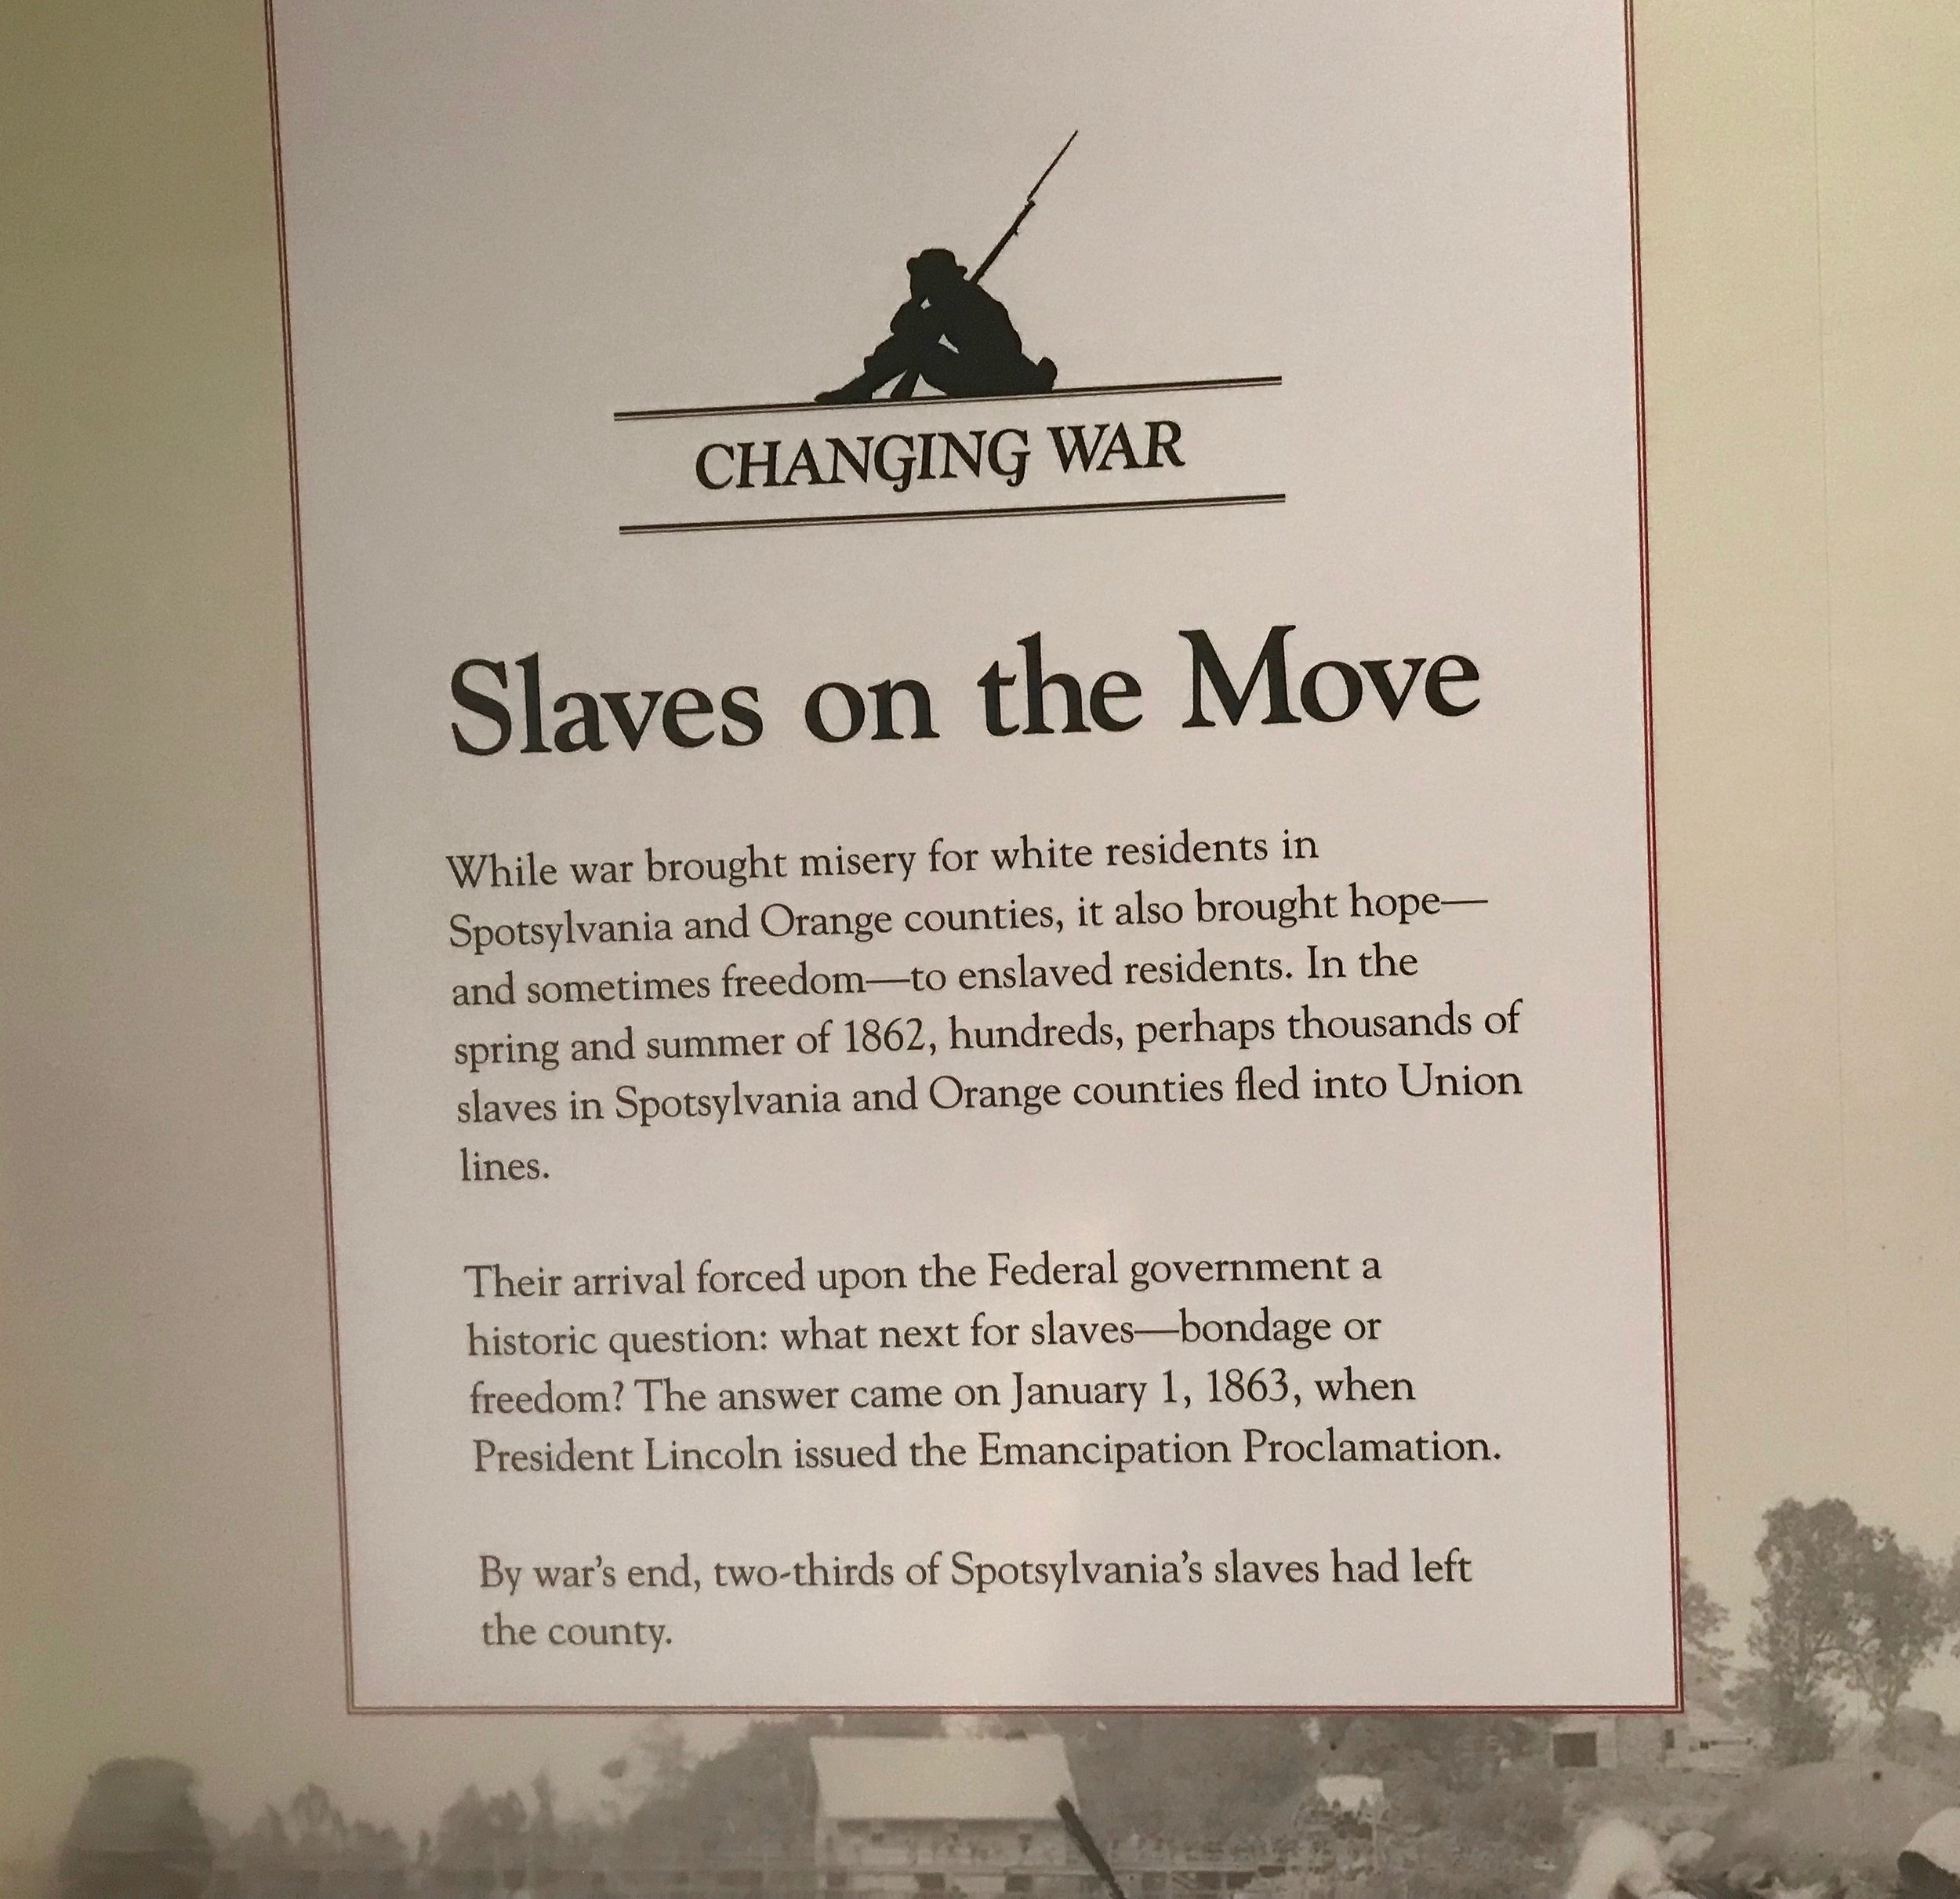  Spotsylvania, Va.: Exhibits now stress that while the advance of Union troops were devastating for Southern landowners, it meant liberation for thousands of enslaved people. 